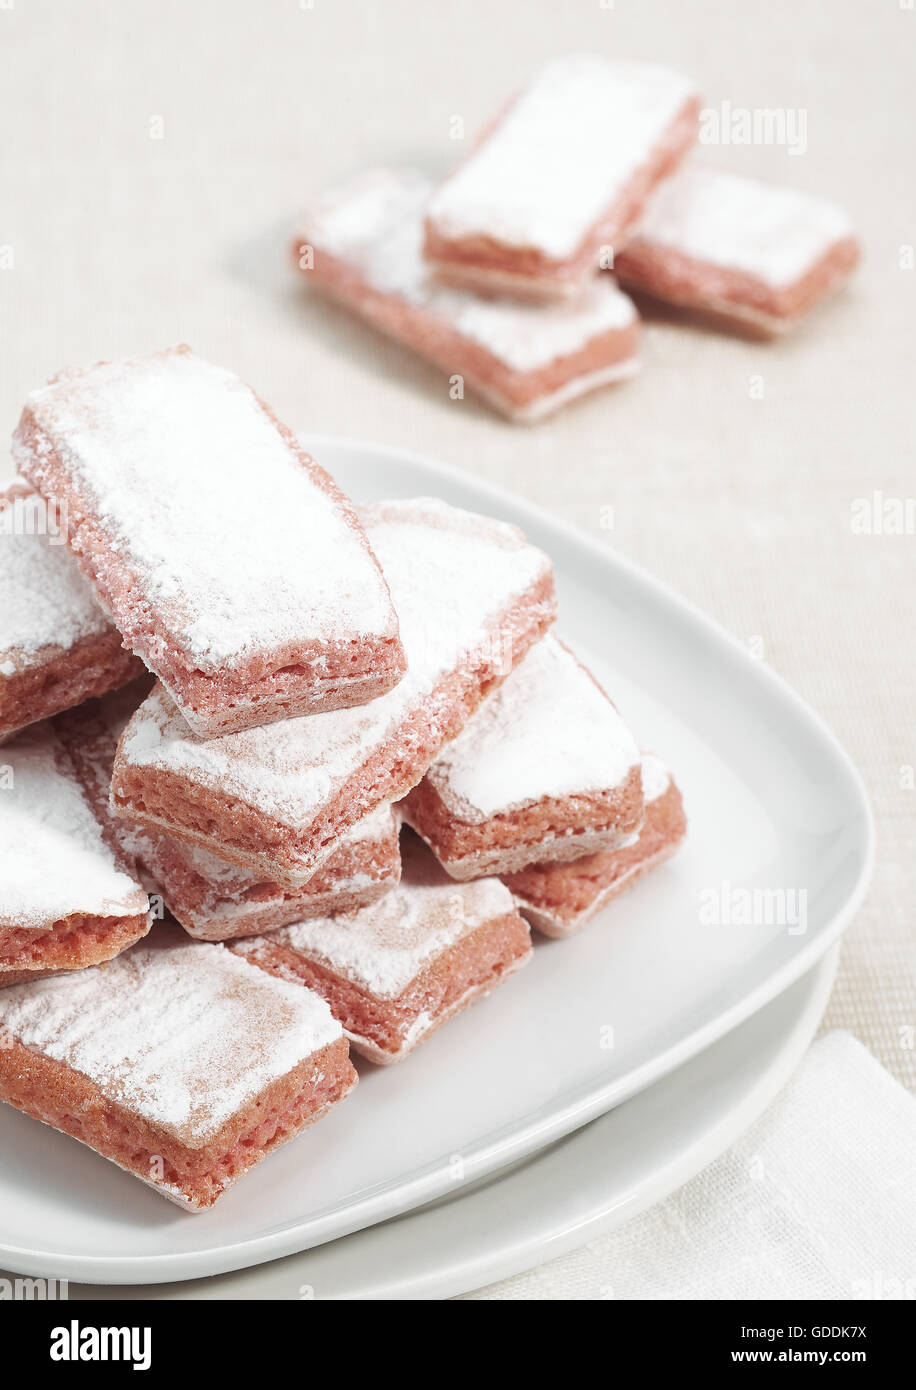 BISCUIT ROSE DE REIMS, A PINK BISCUIT FOR DIPPING IN CHAMPAGNE Stock Photo